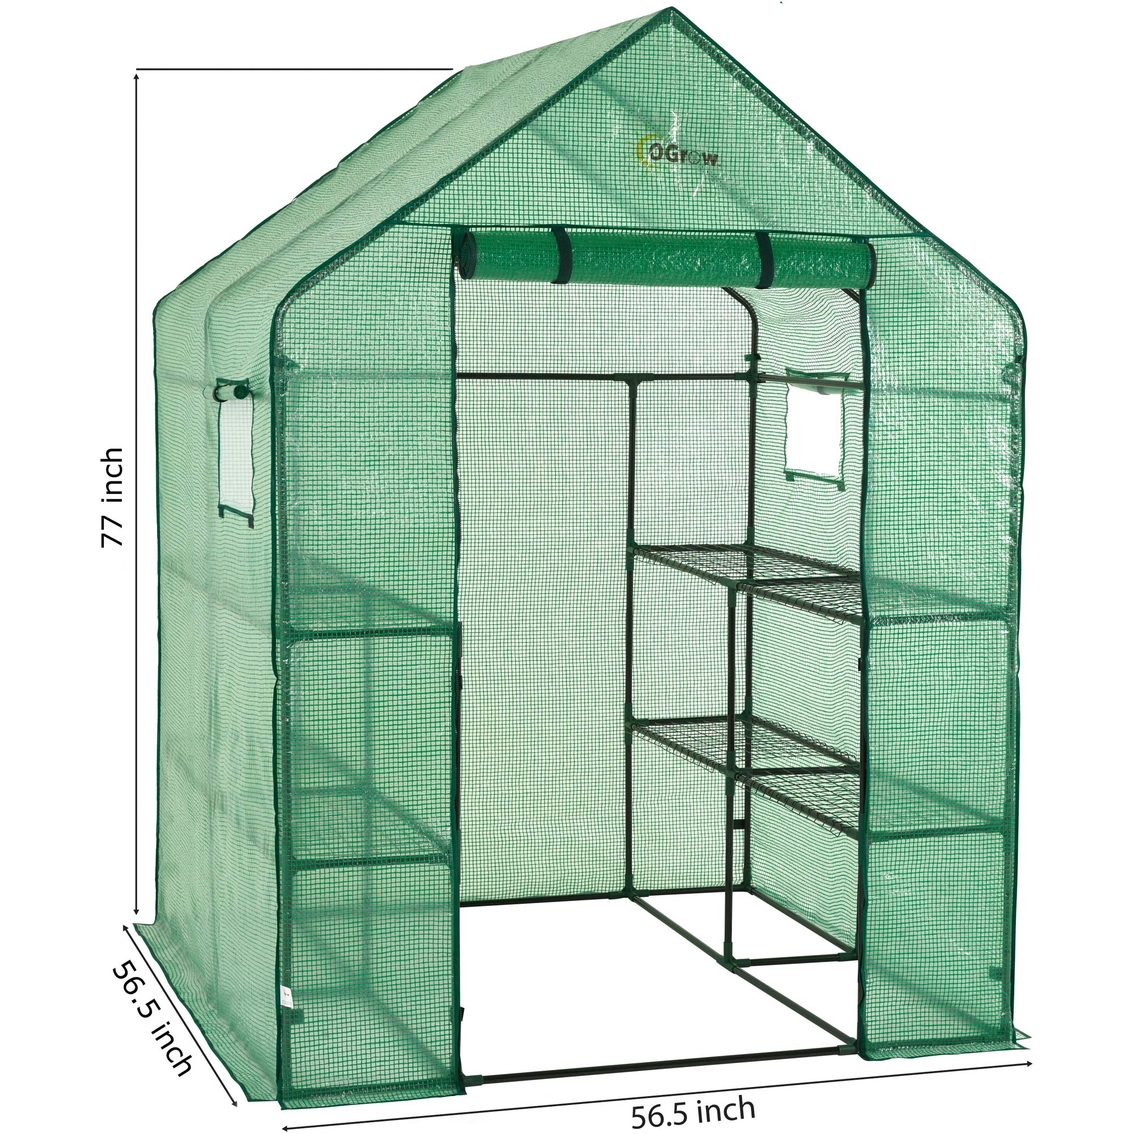 Ogrow Deluxe Walk In 2 Tier 8 Shelf Portable Lawn and Garden Greenhouse - Image 7 of 7